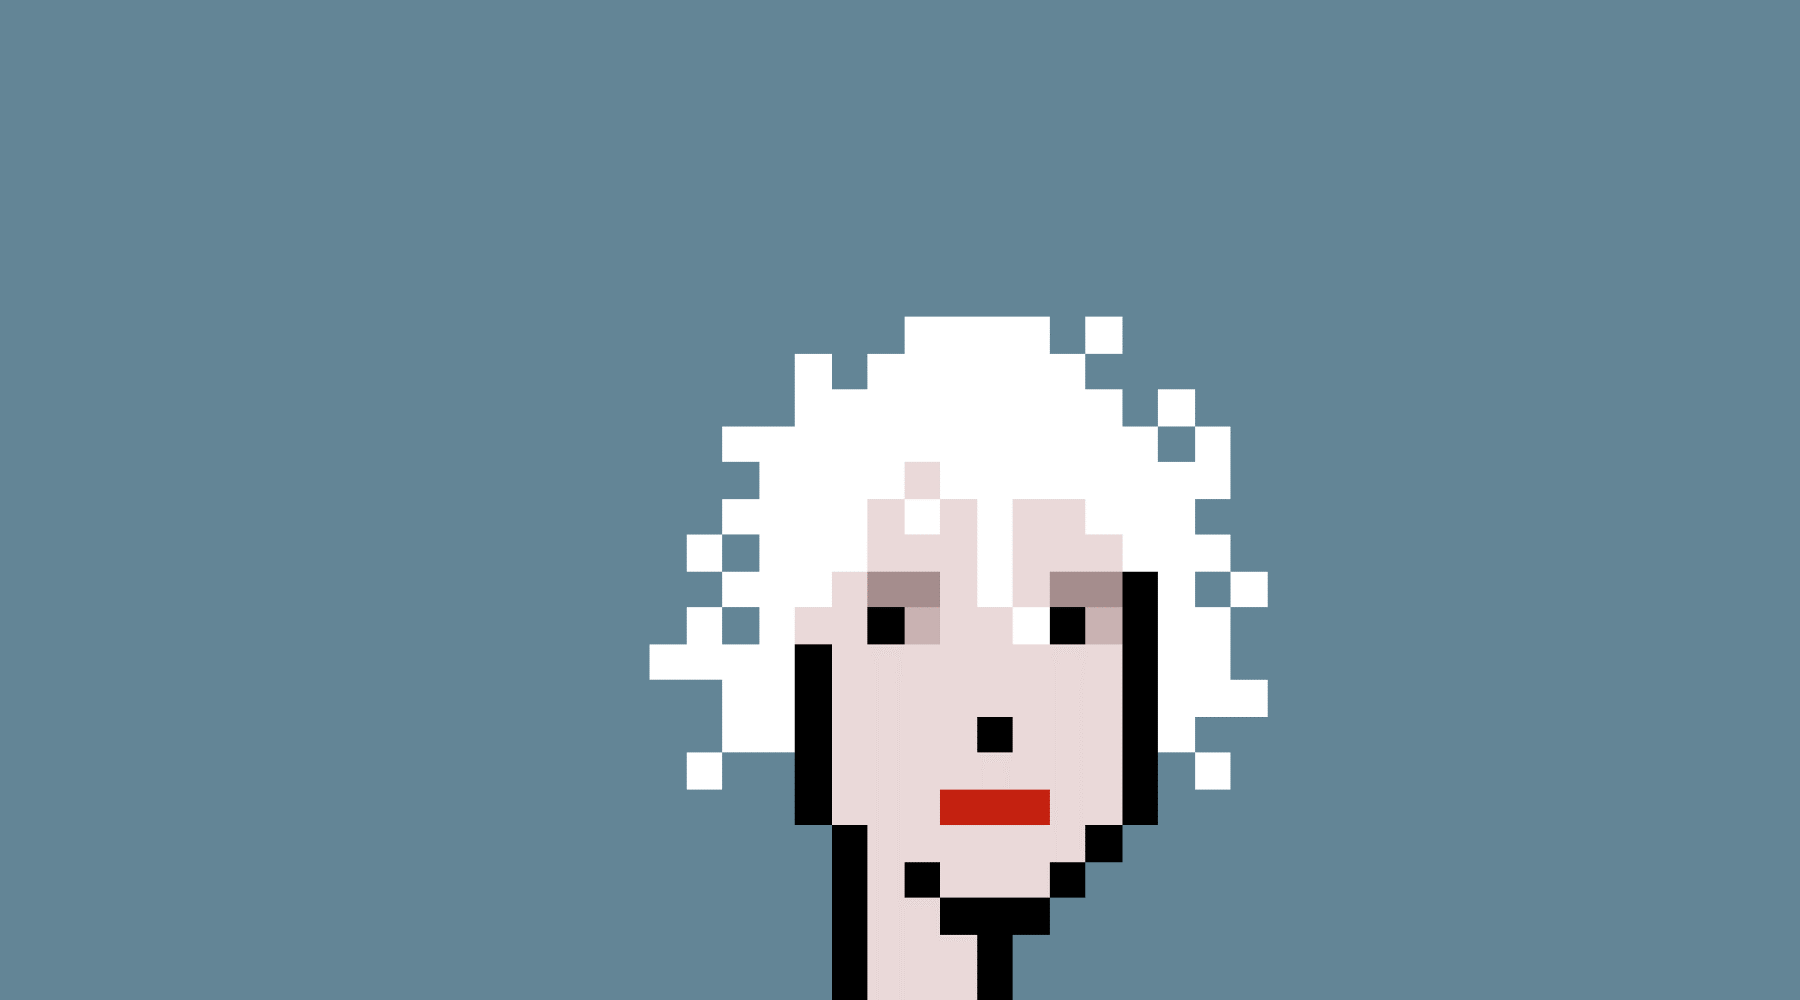 Larva Labs "CryptoPunk #9998" — a pixelated white-haired